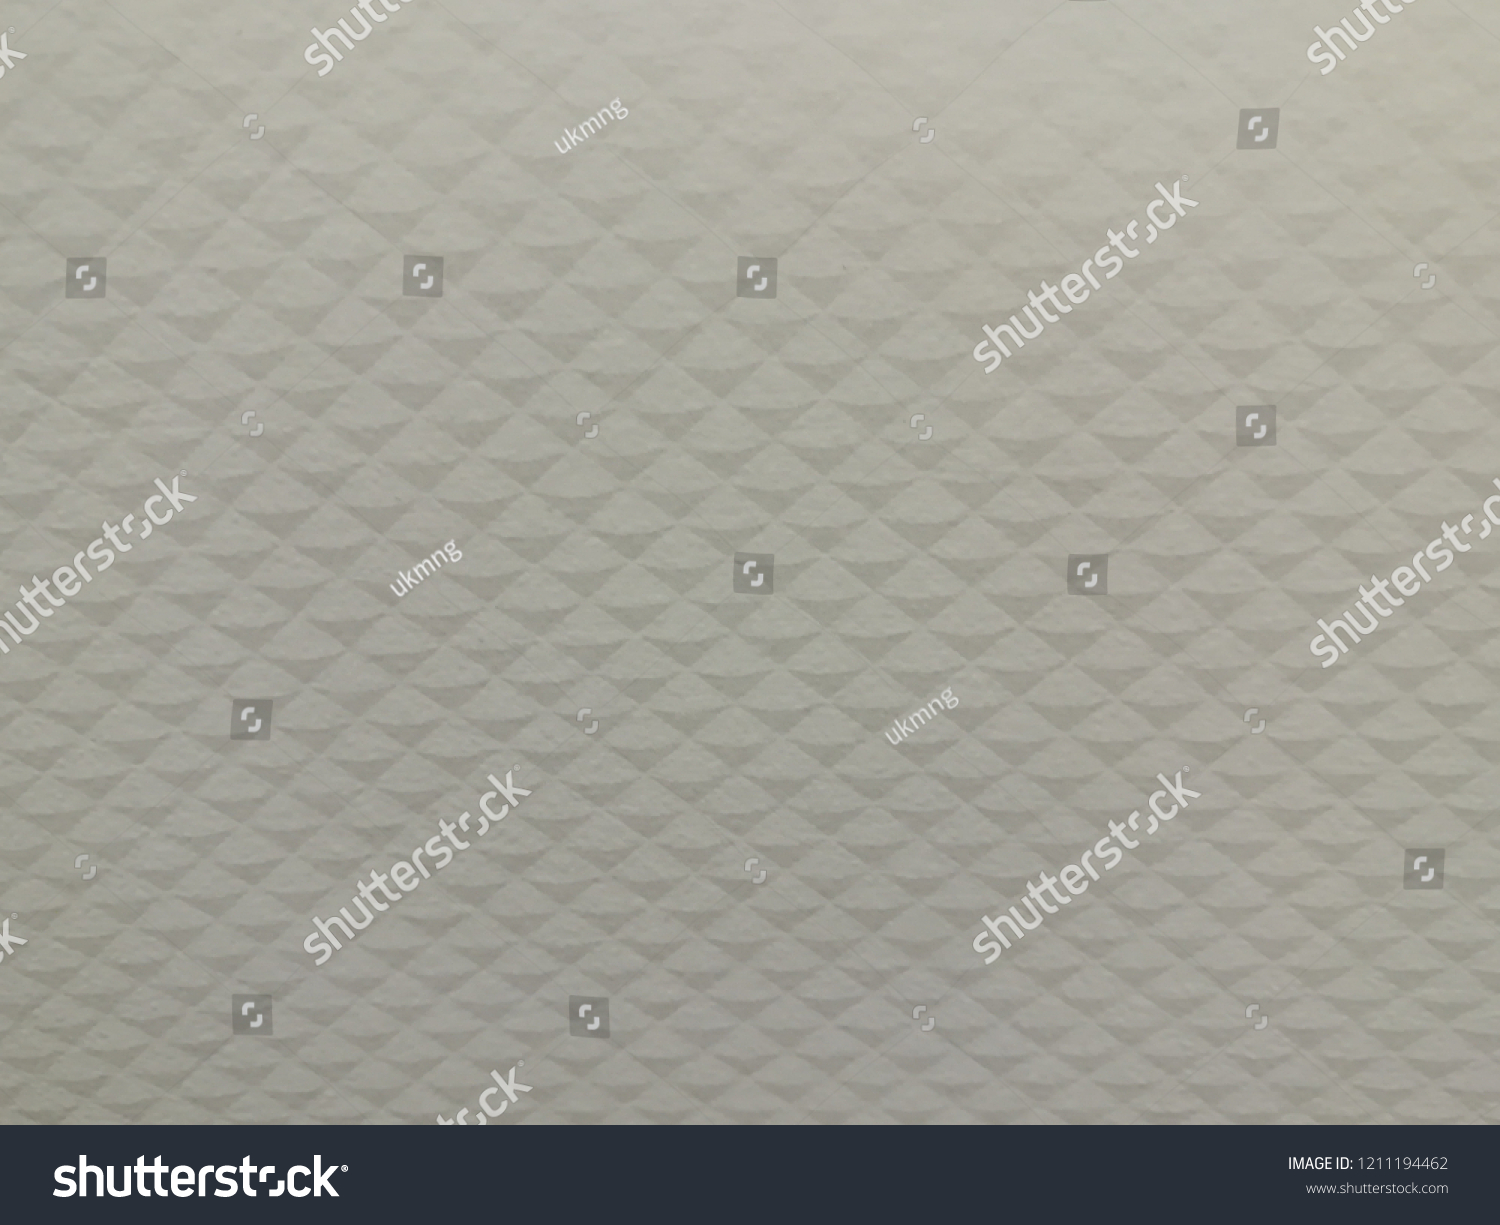 Background and texture or rhombus pattern #1211194462